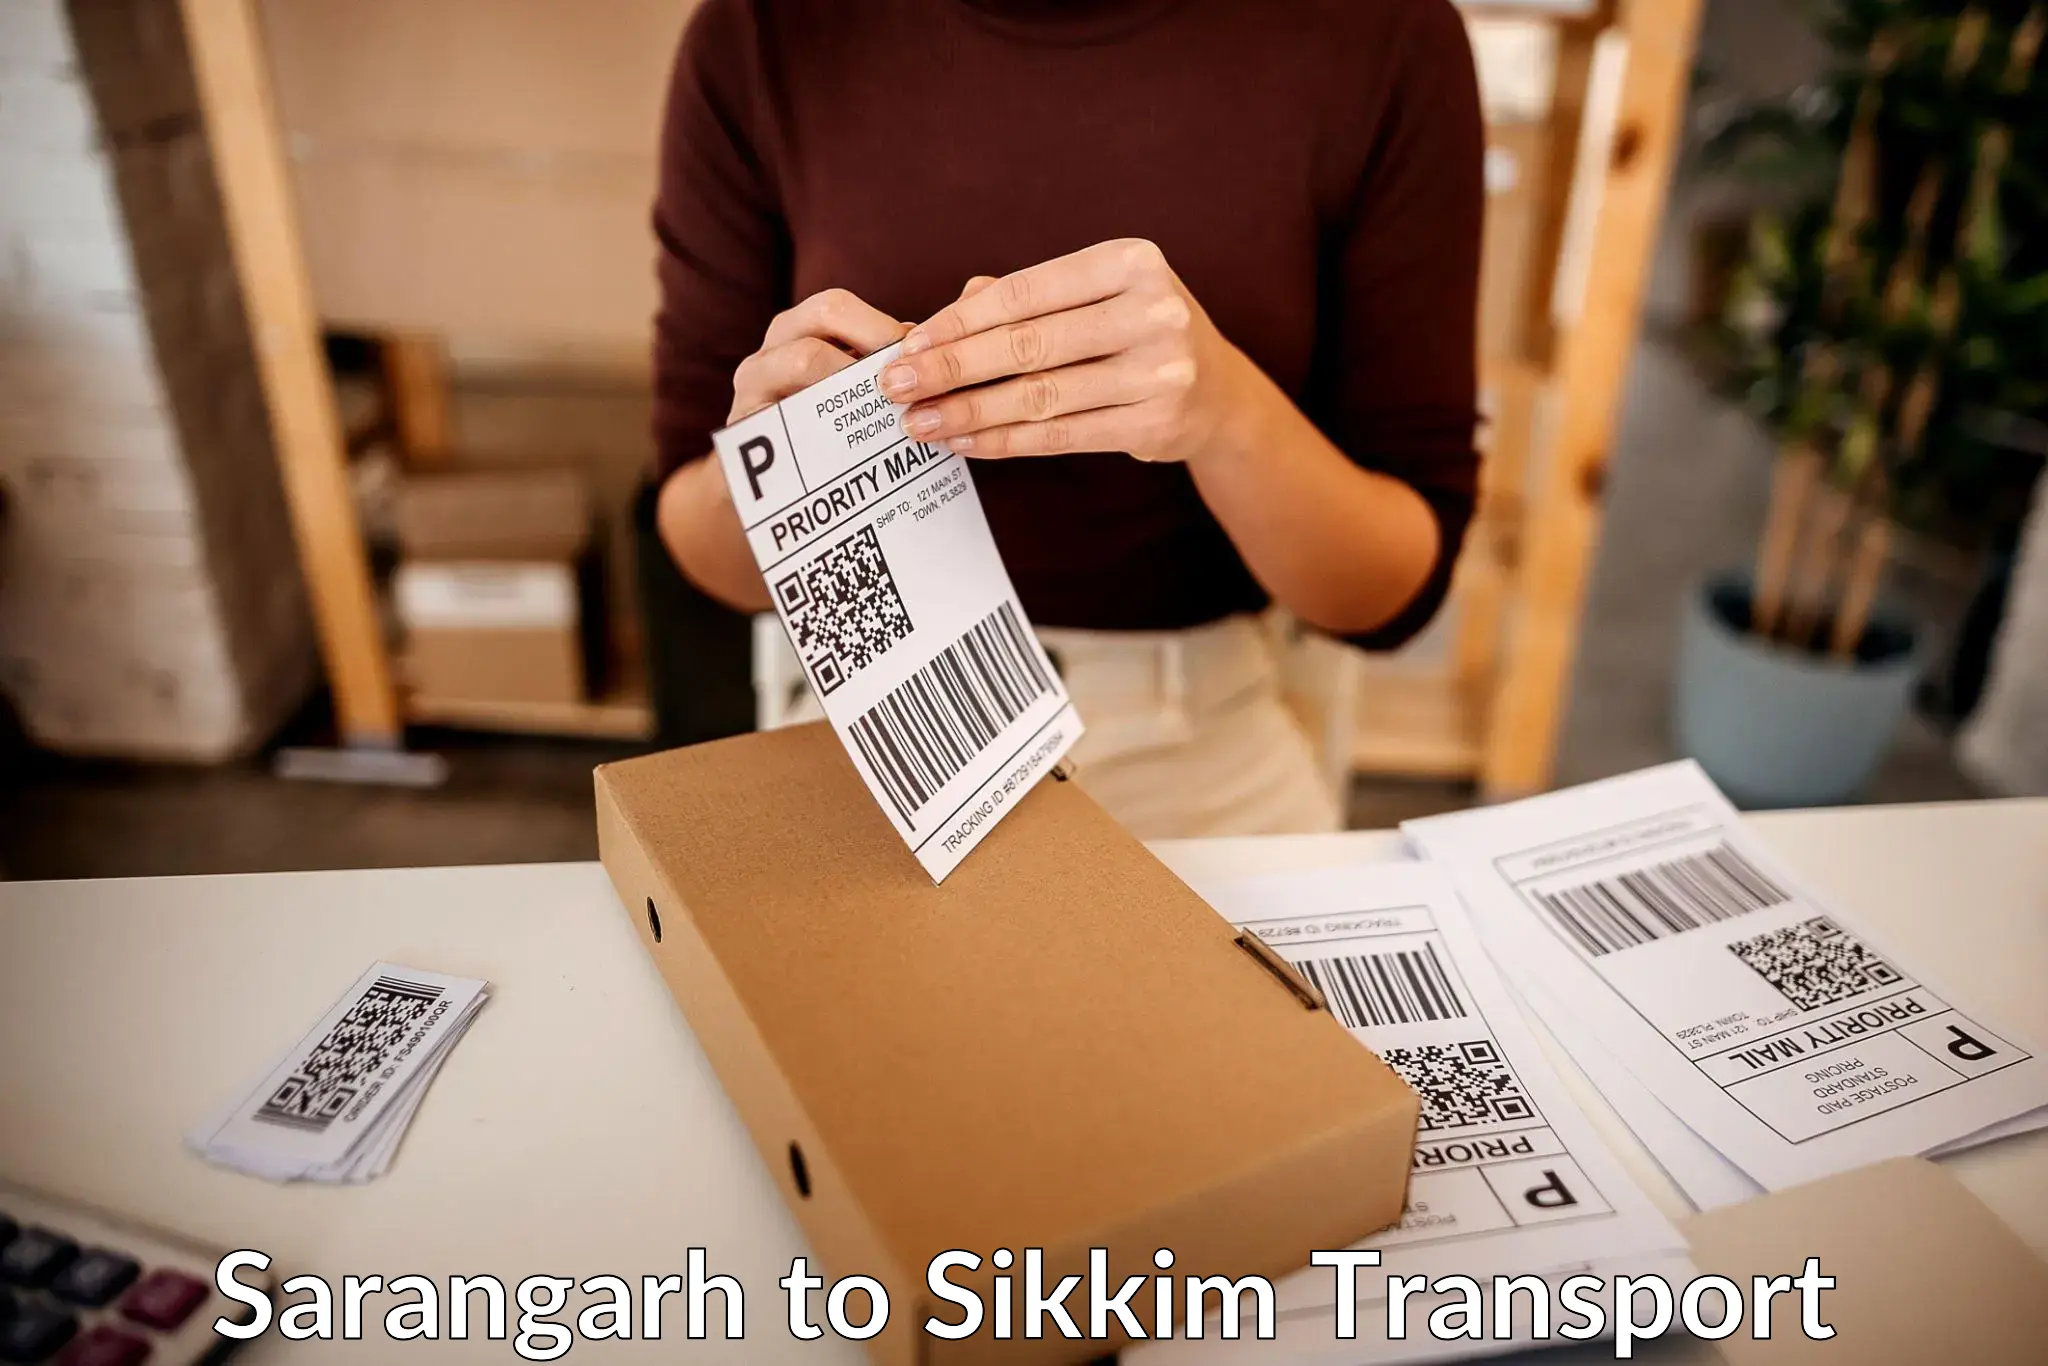 Commercial transport service Sarangarh to North Sikkim